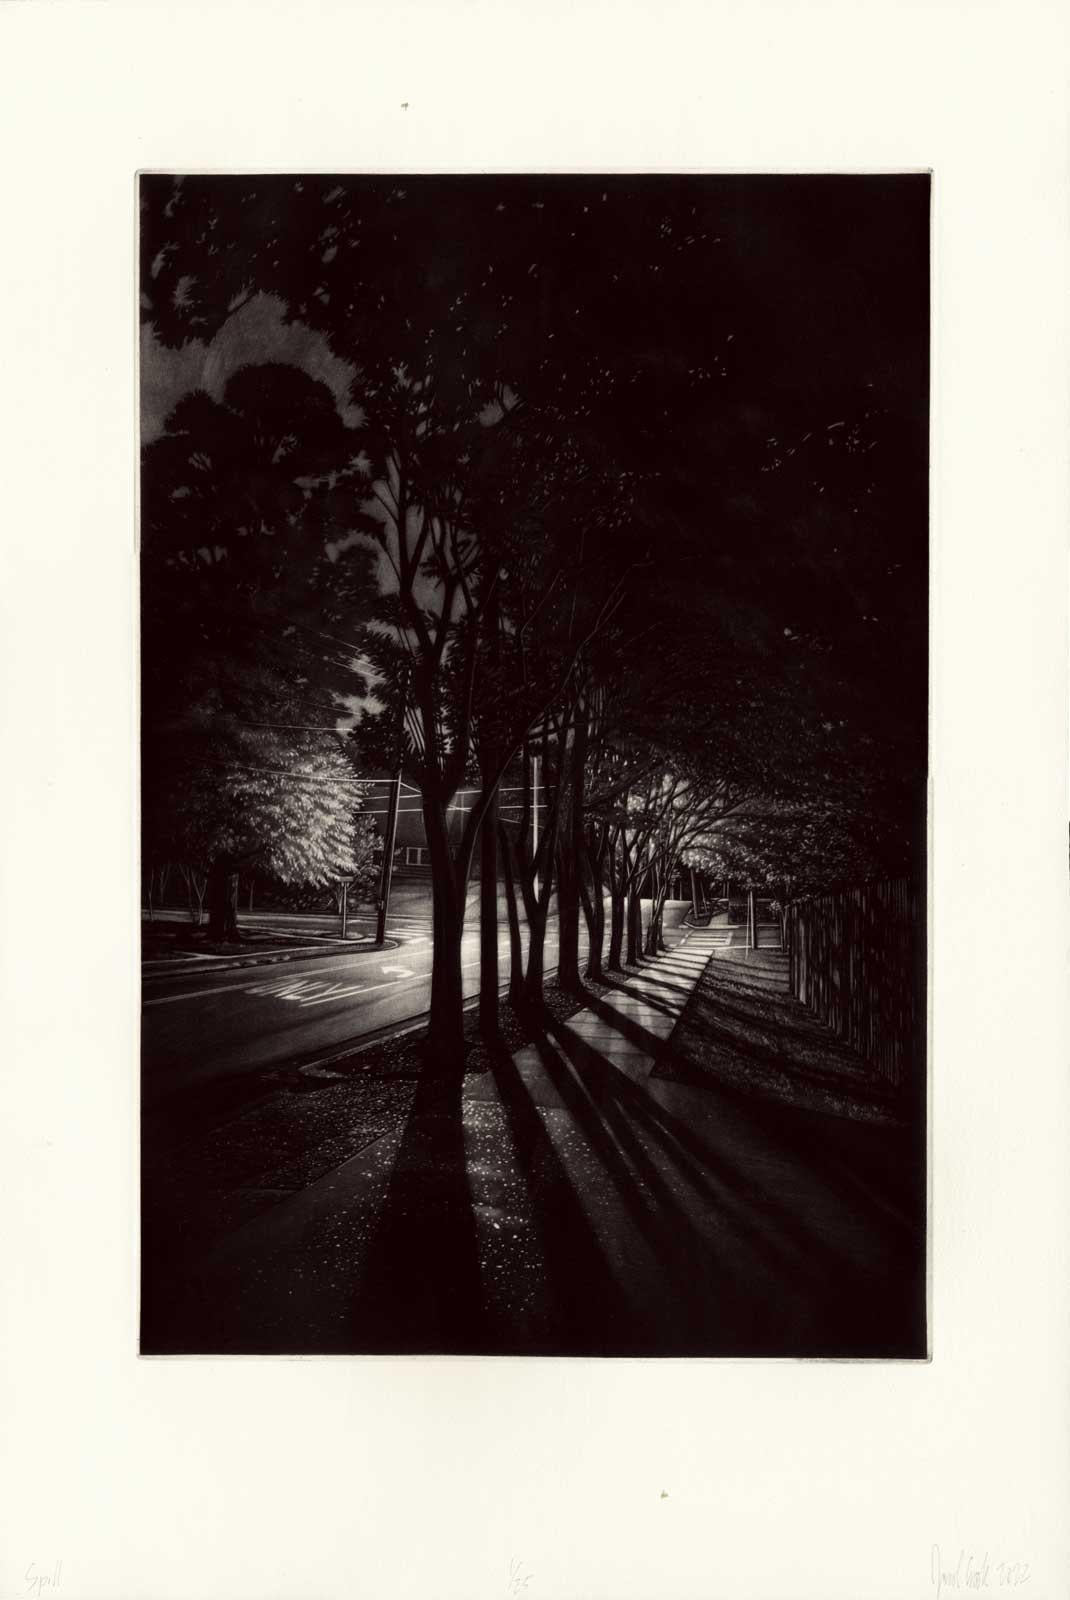 Spill (A canopy of crepe myrtle trees dominate this deep southern street night) - Print by Jacob Crook